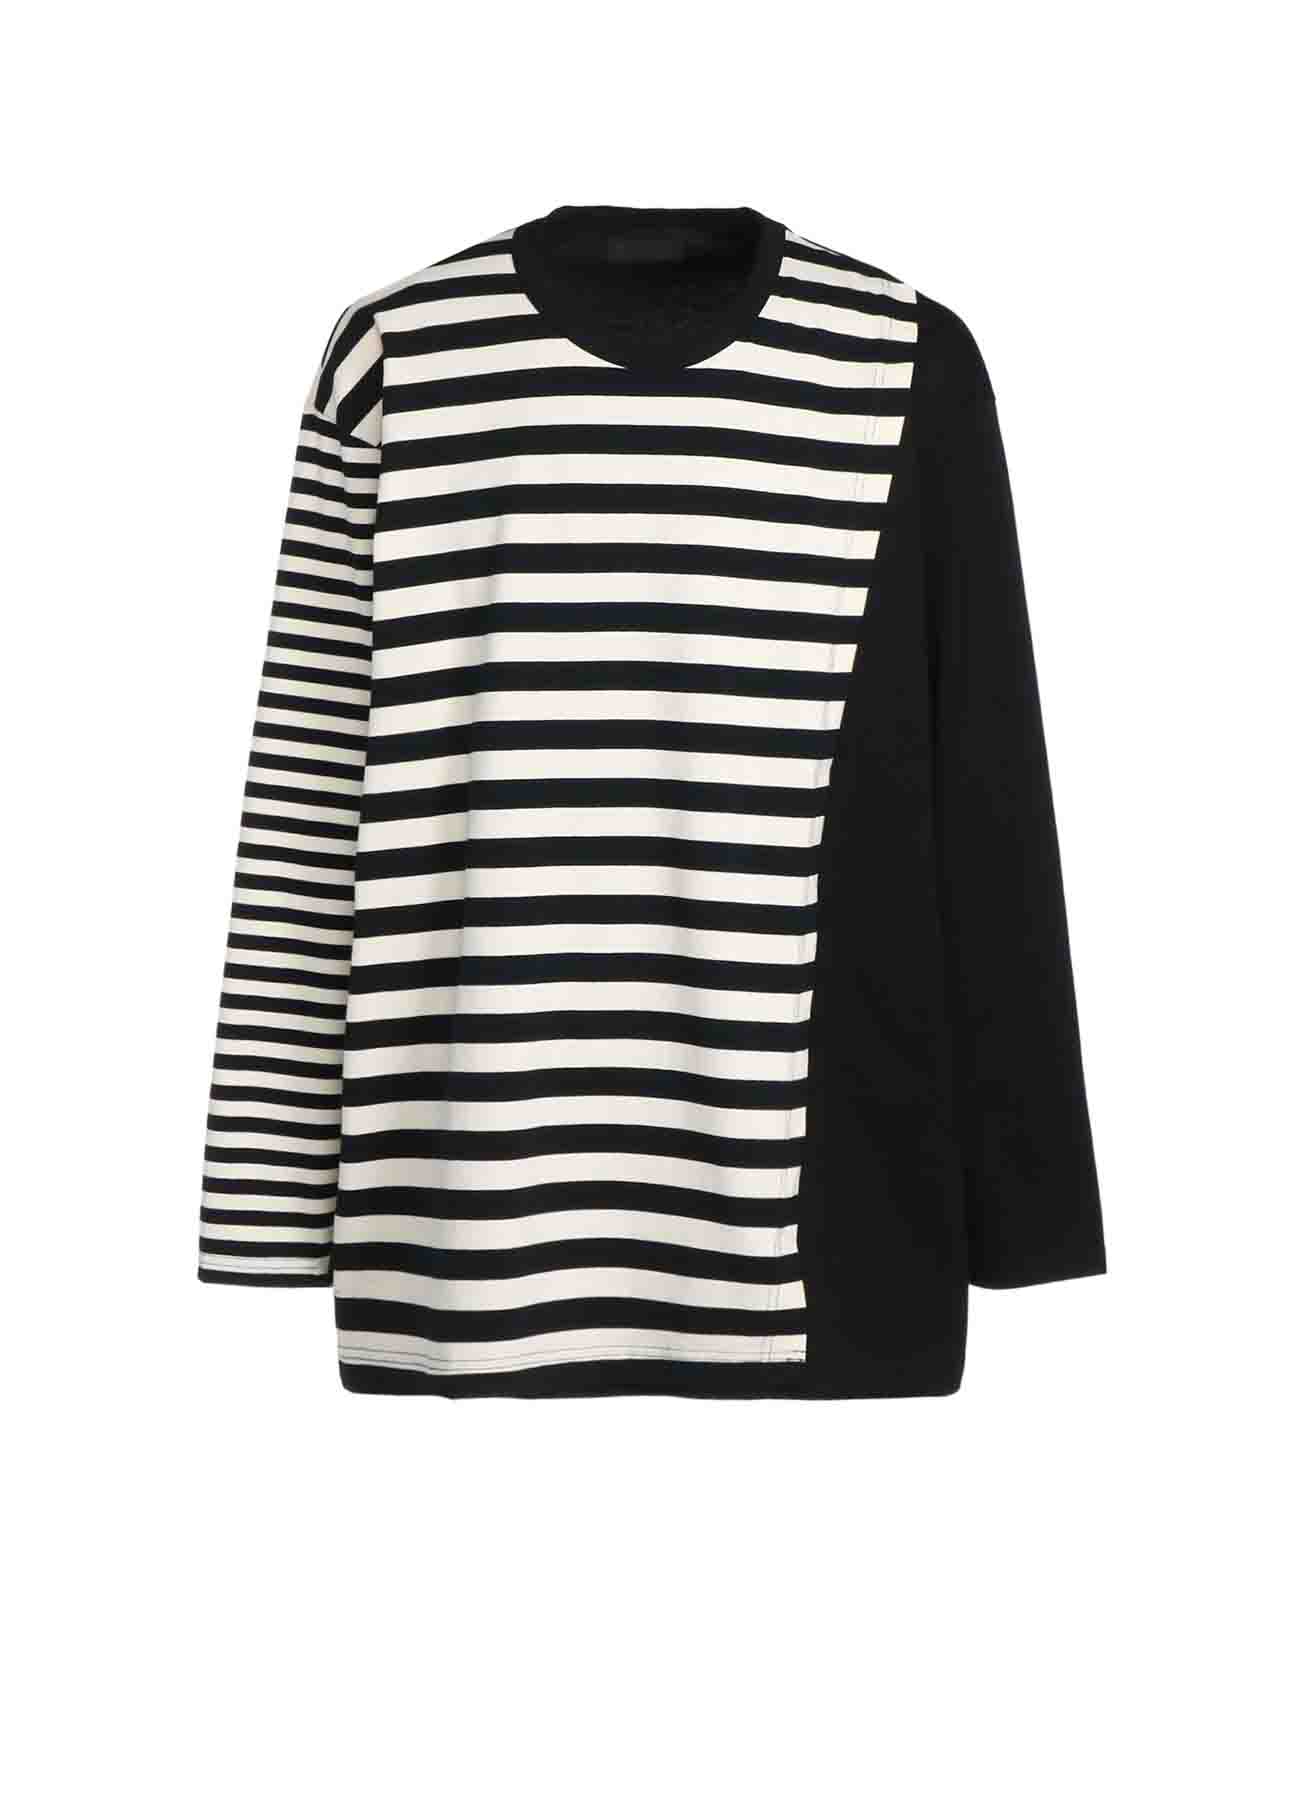 COTTON JERSEY FUSED STRIPE LAYERED LONG-SLEEVED T-SHIRT